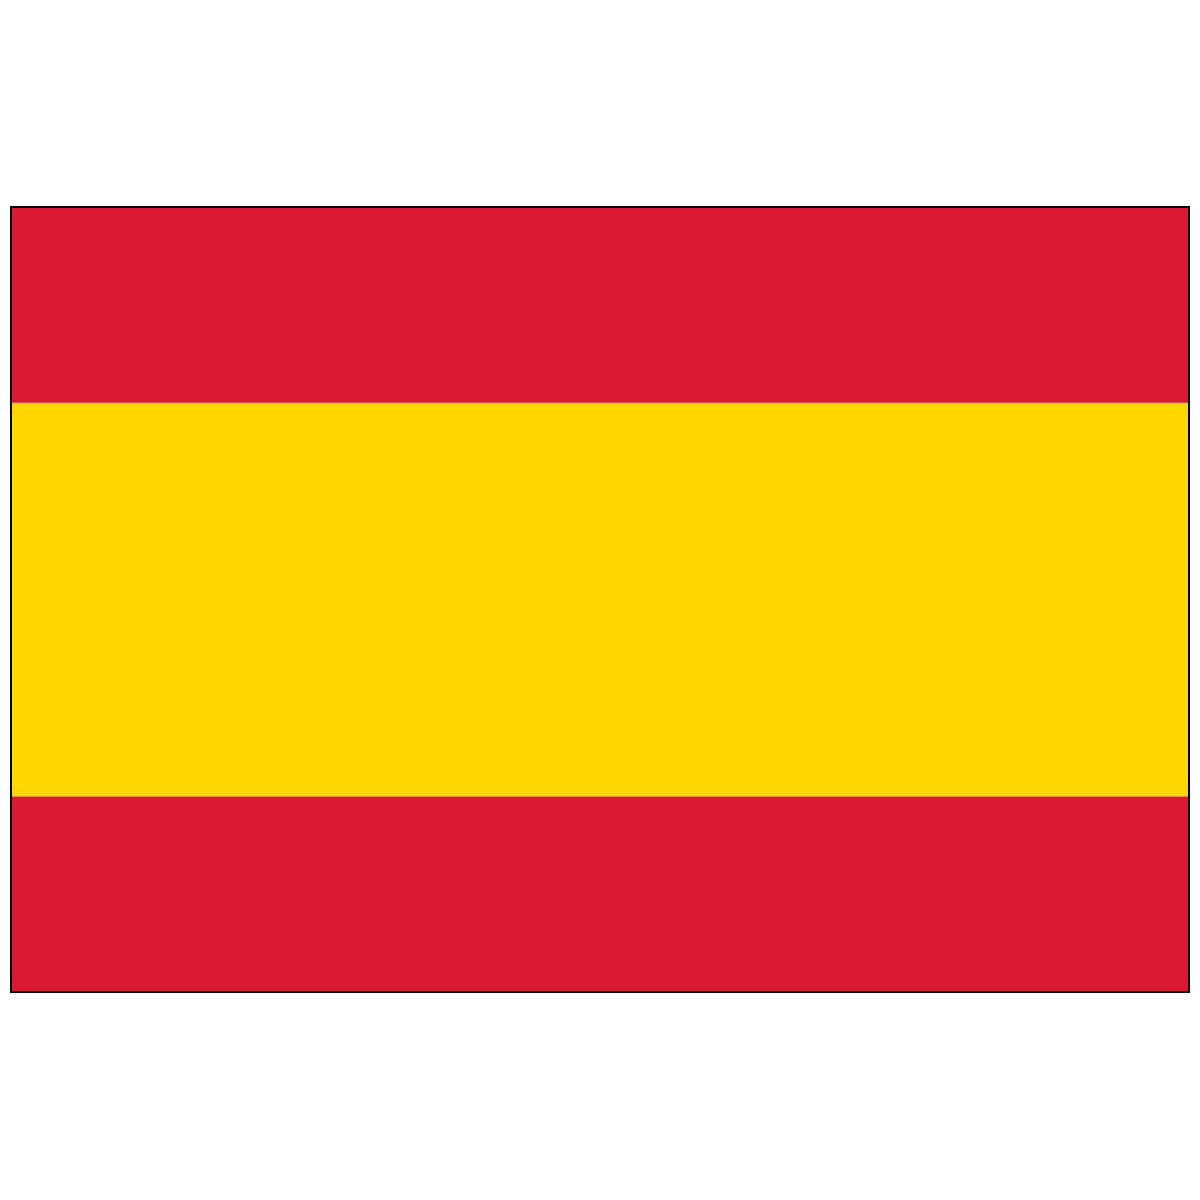 Spain-Flag-National-Flags-International-Flags-Country Flags-Flagsource Southeast-Woodstock-GA